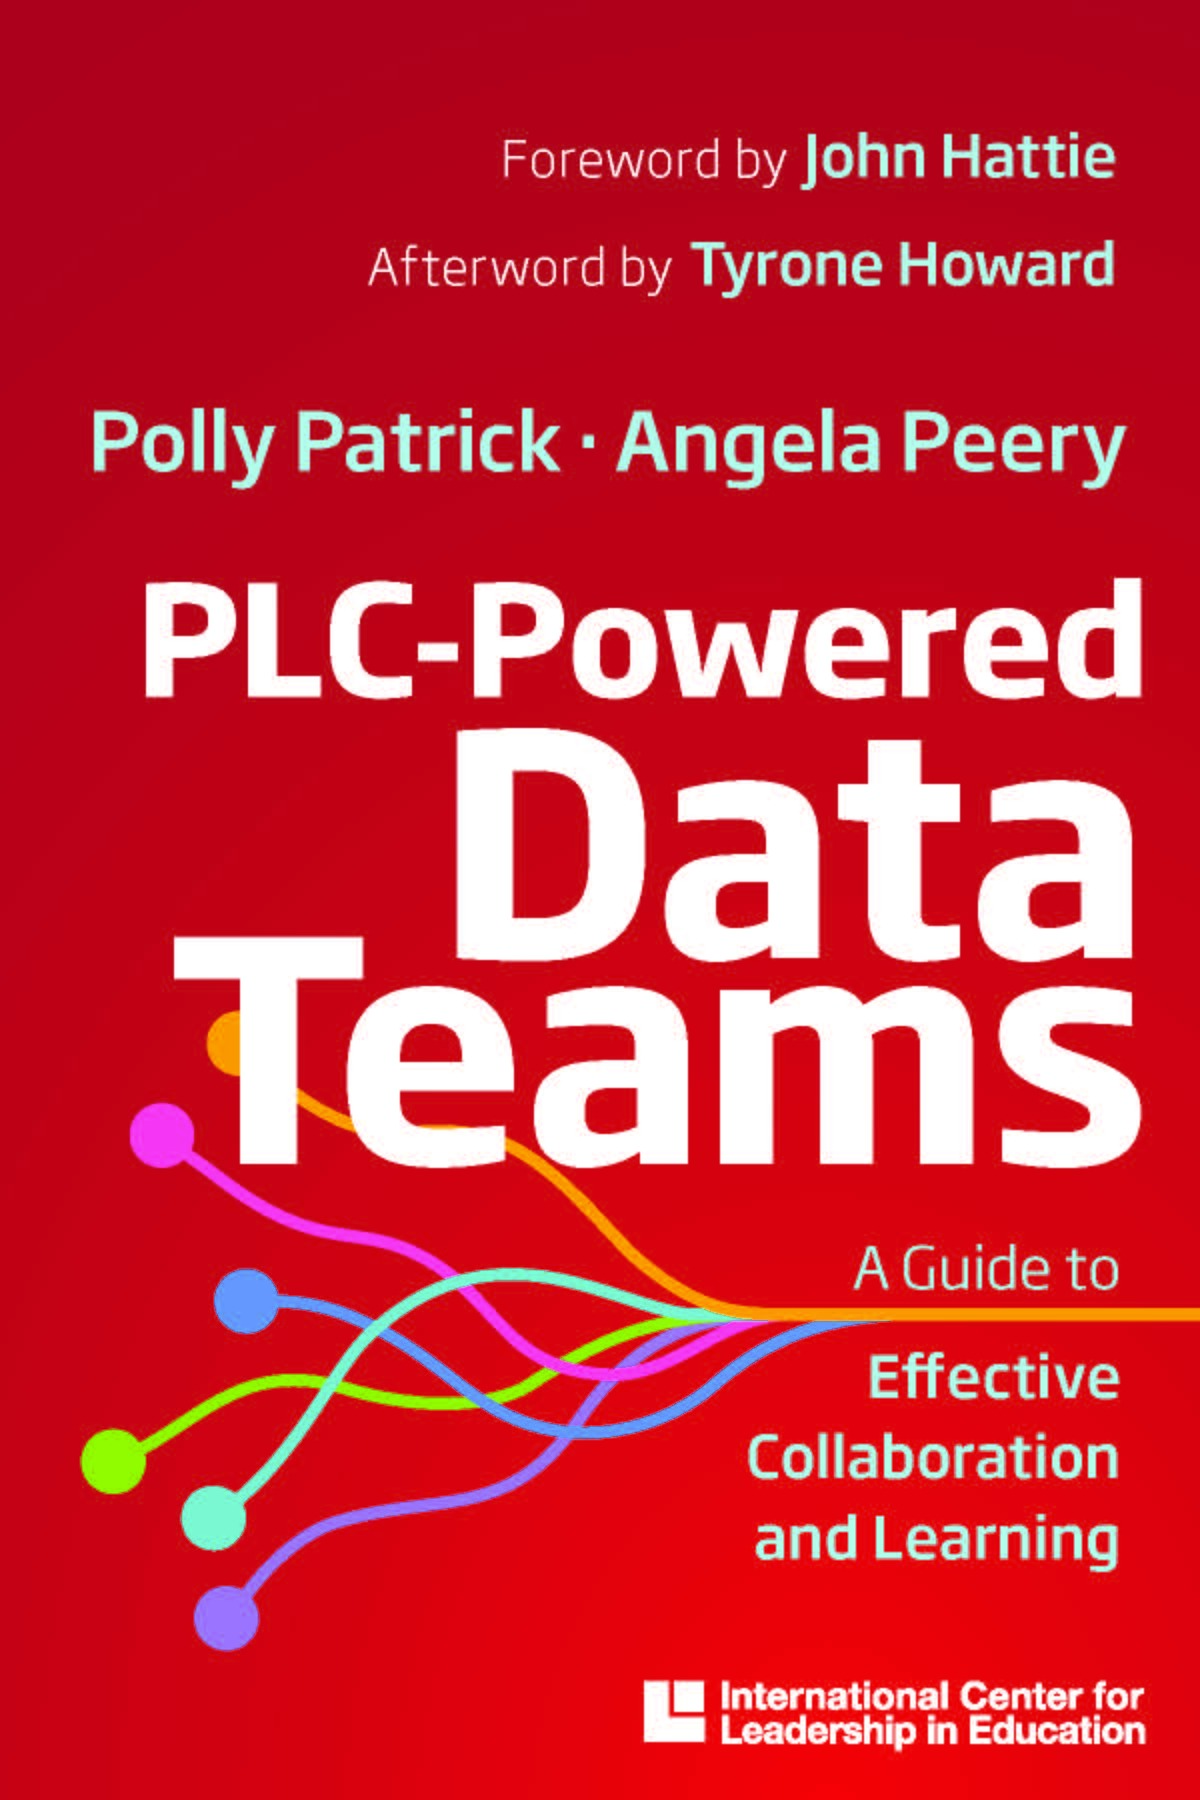 PLC-Powered Data Teams A Guide to Effective Collaboration and Learning-9780358568391